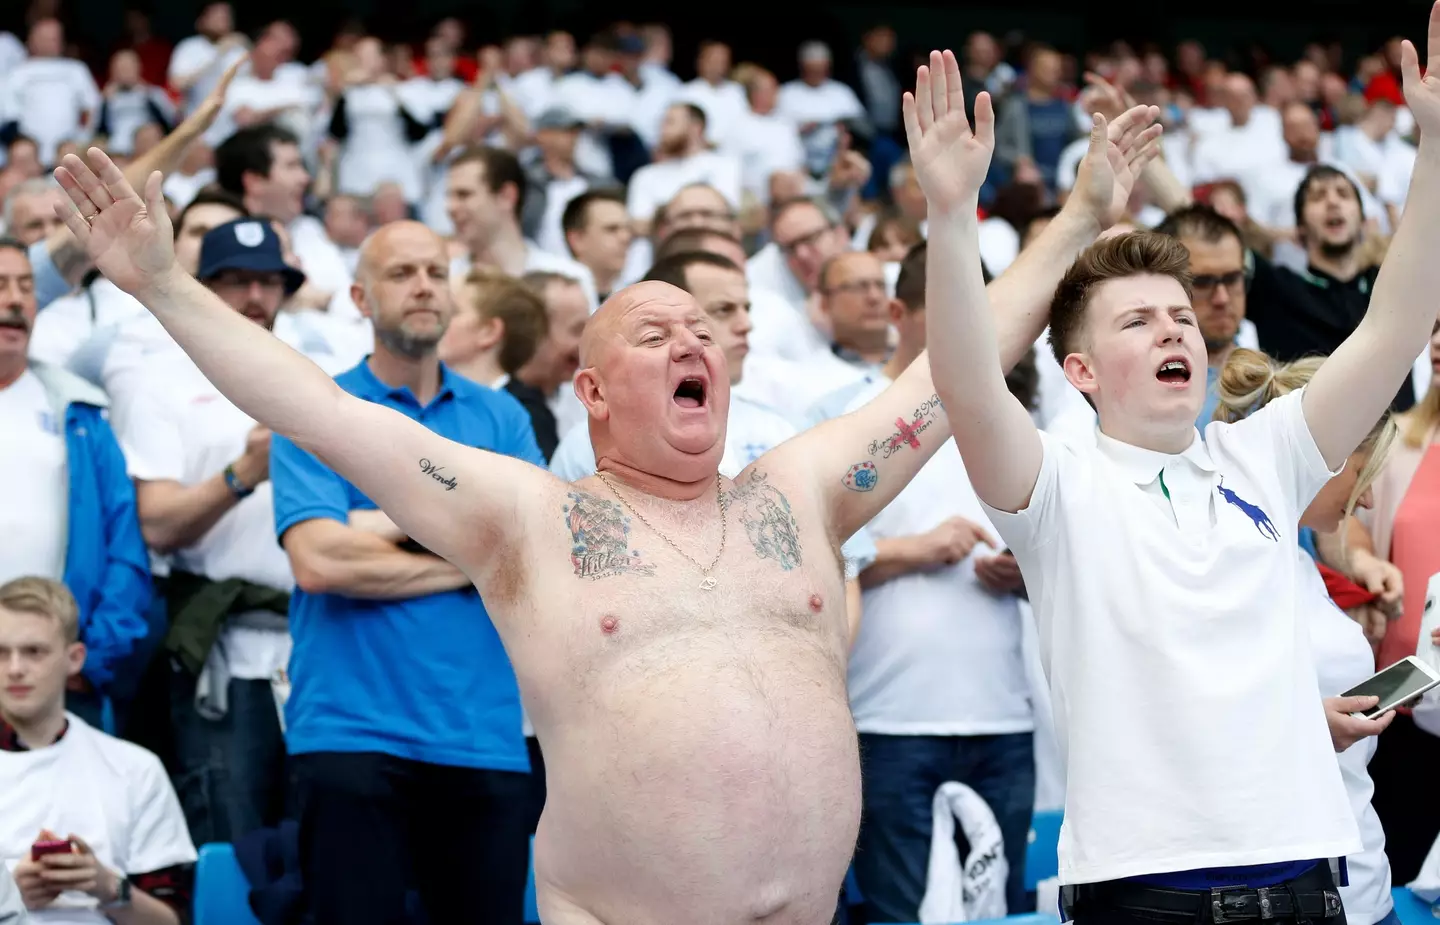 Fans have been warned to keep their shirts on at matches (Image: Alamy)